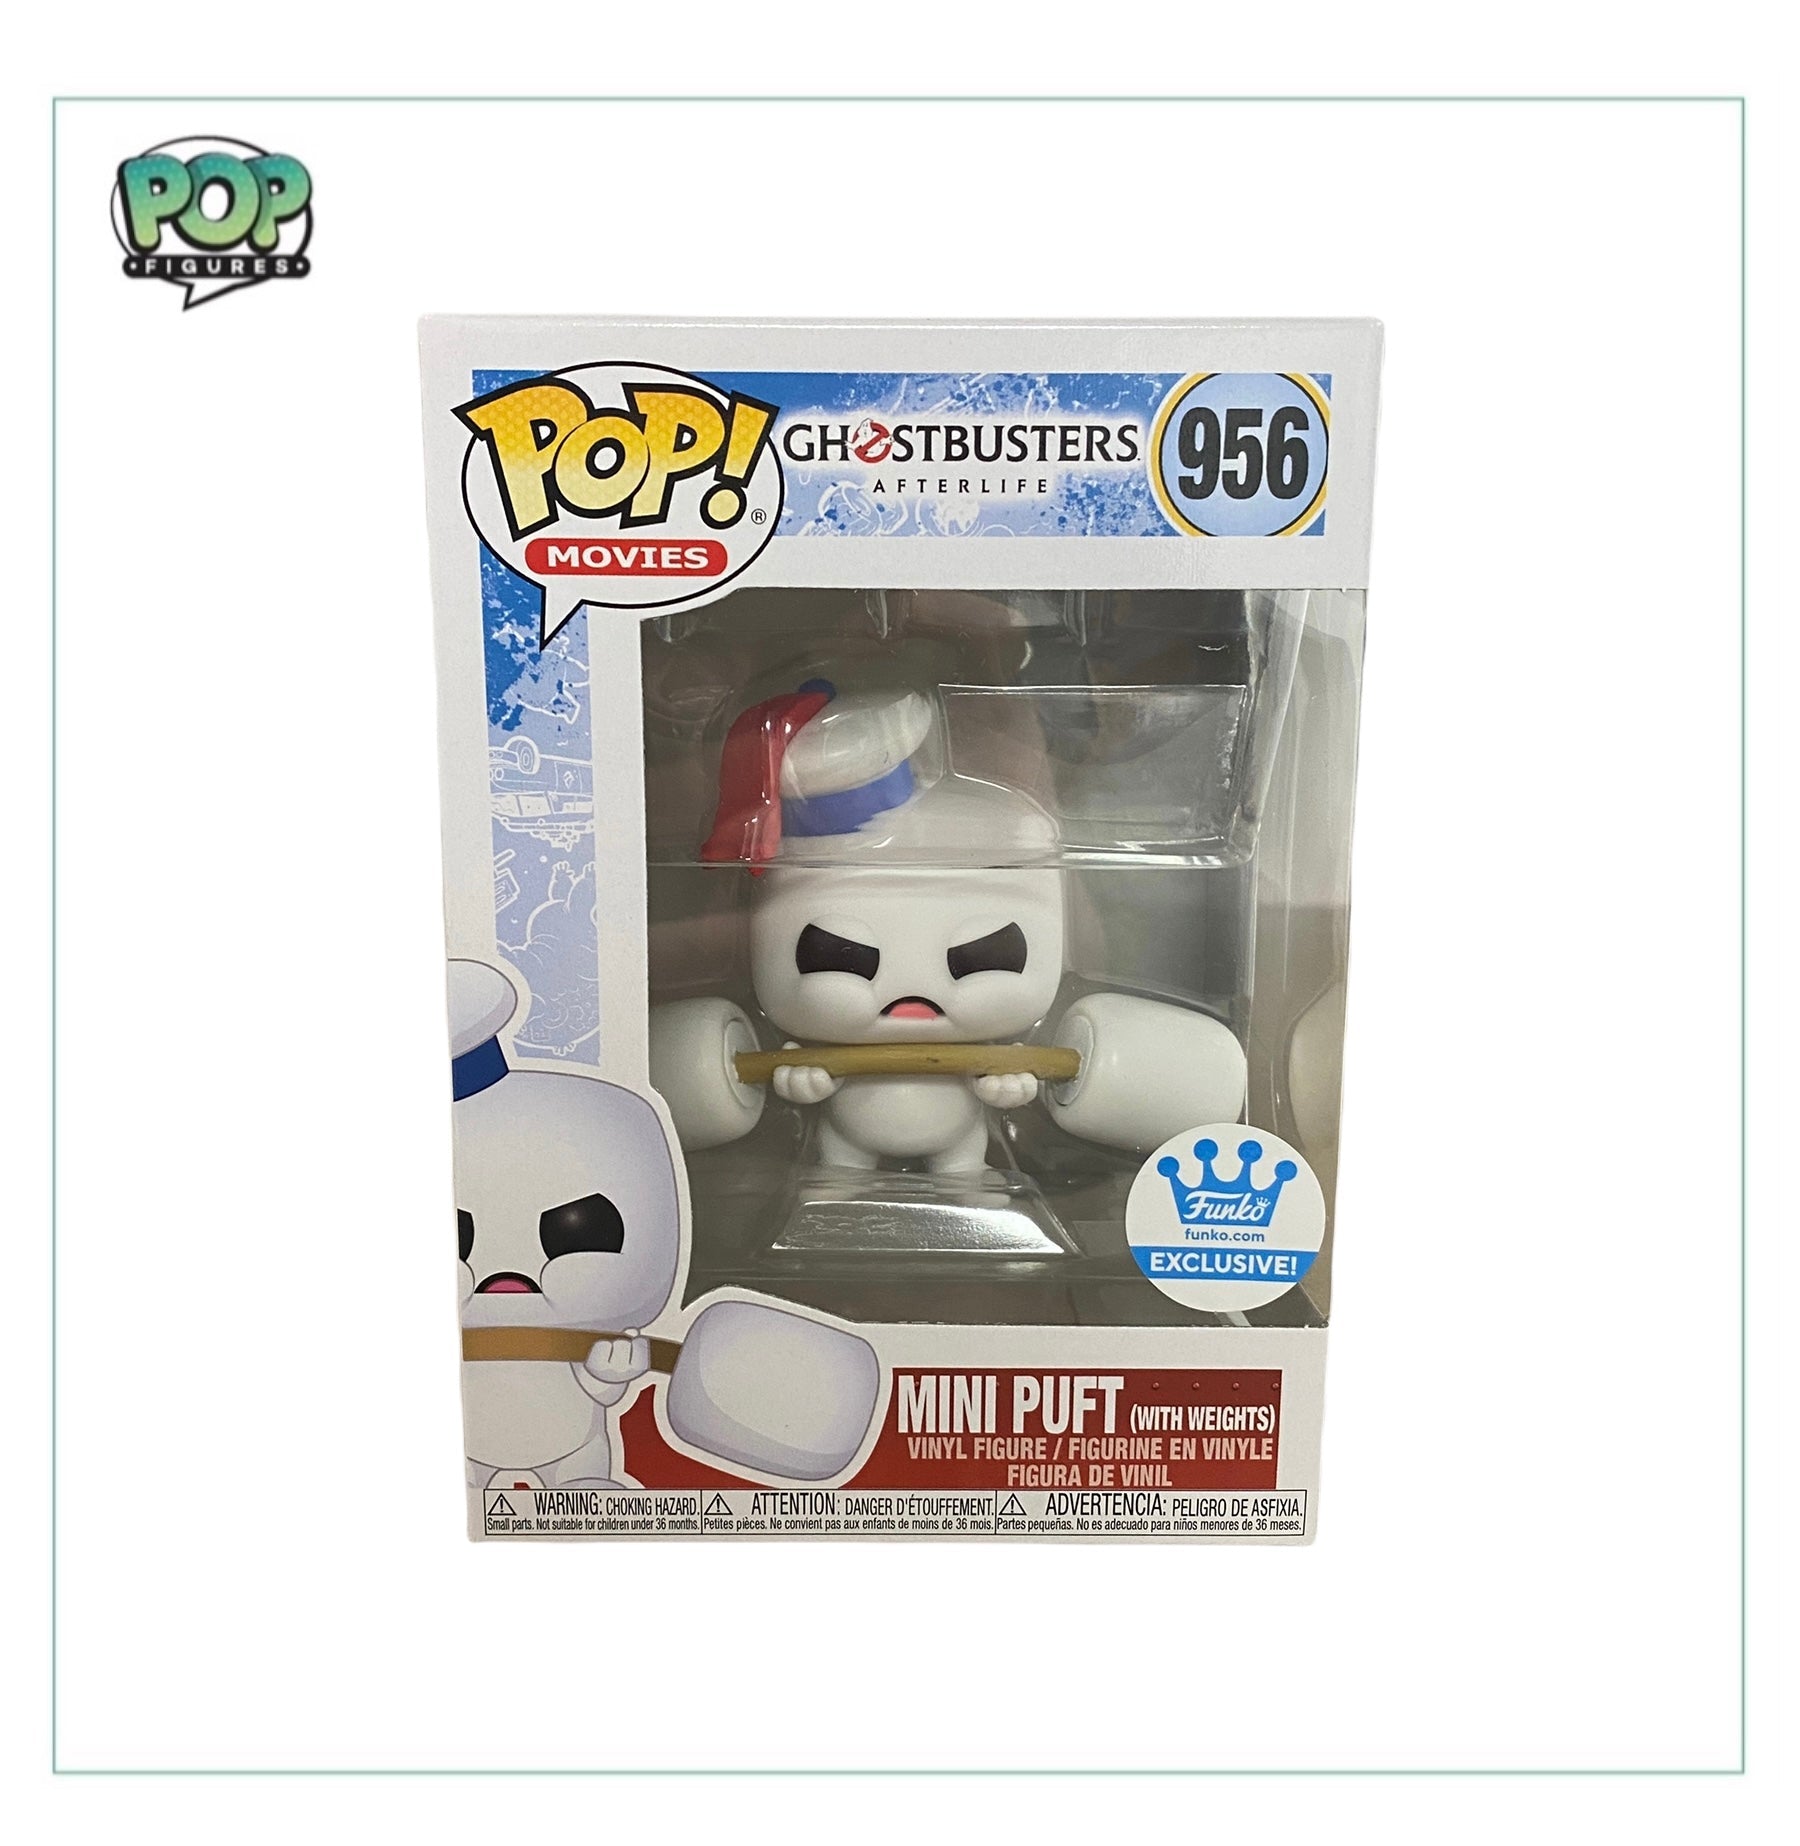 Mini Puft (With Weights) #956 Funko Pop! - Ghostbusters Afterlife - Funko Shop Exclusive - Angry Cat